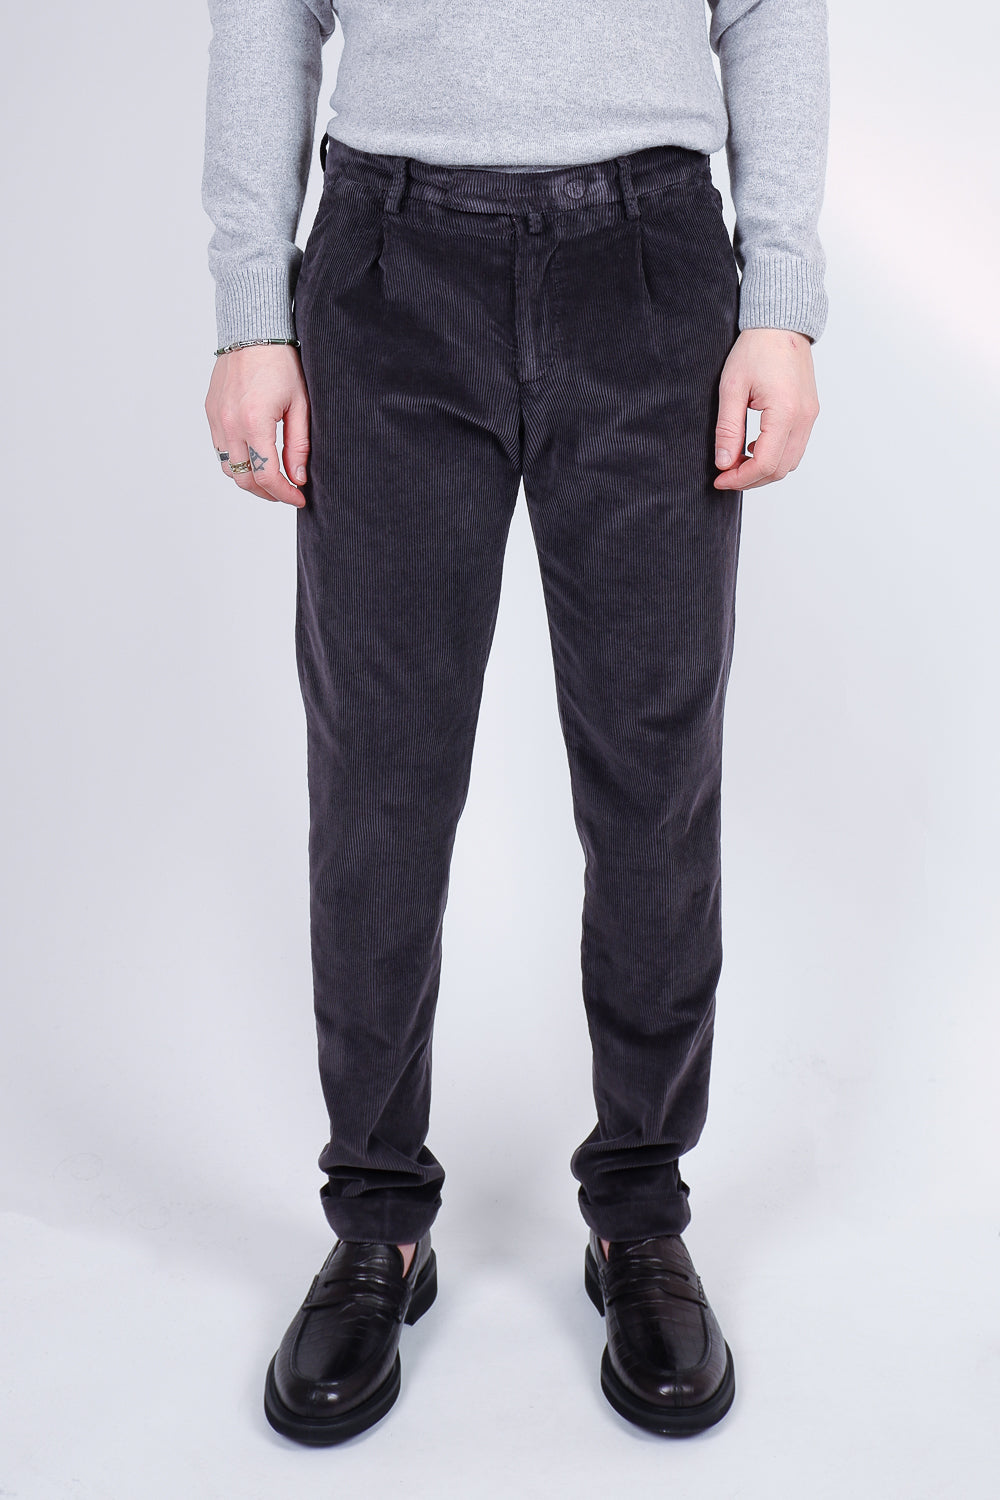 Buy the Briglia Italian Corduroy Trouser in Charcoal at Intro. Spend £50 for free UK delivery. Official stockists. We ship worldwide.